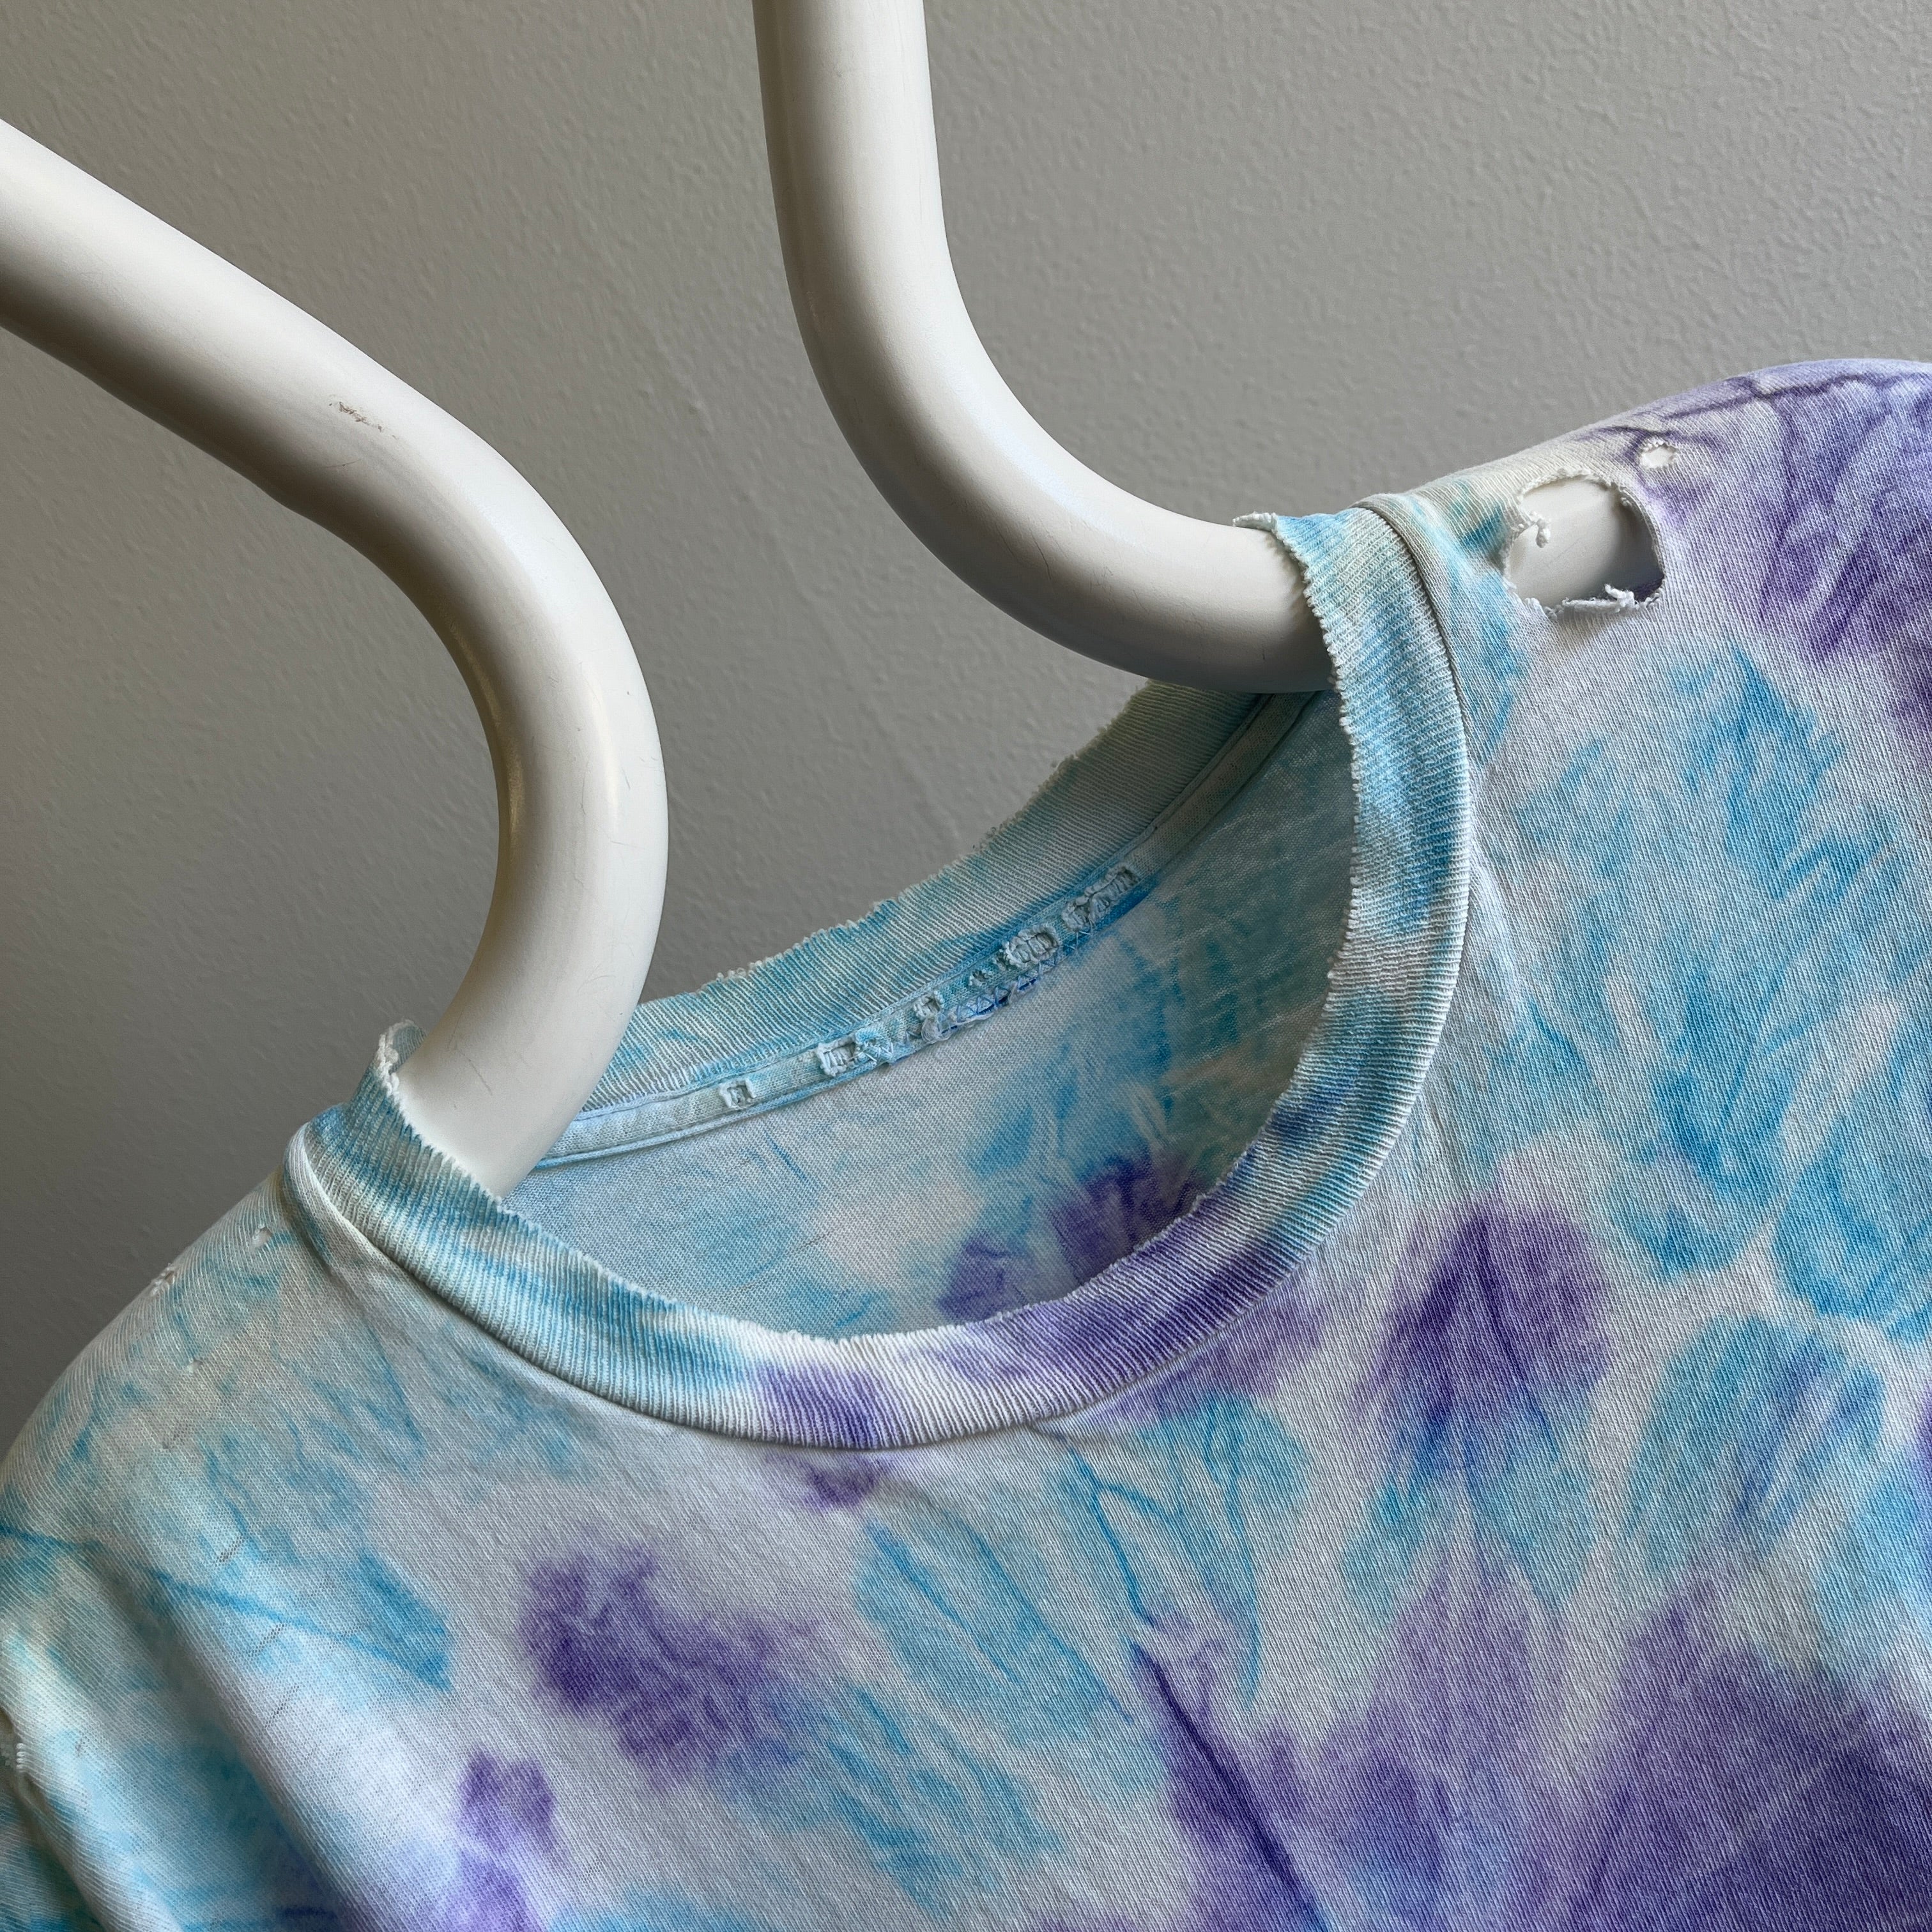 1990s Super Soft Beat Up Tie Dye T-Shirt - Perfectly Thrashed!